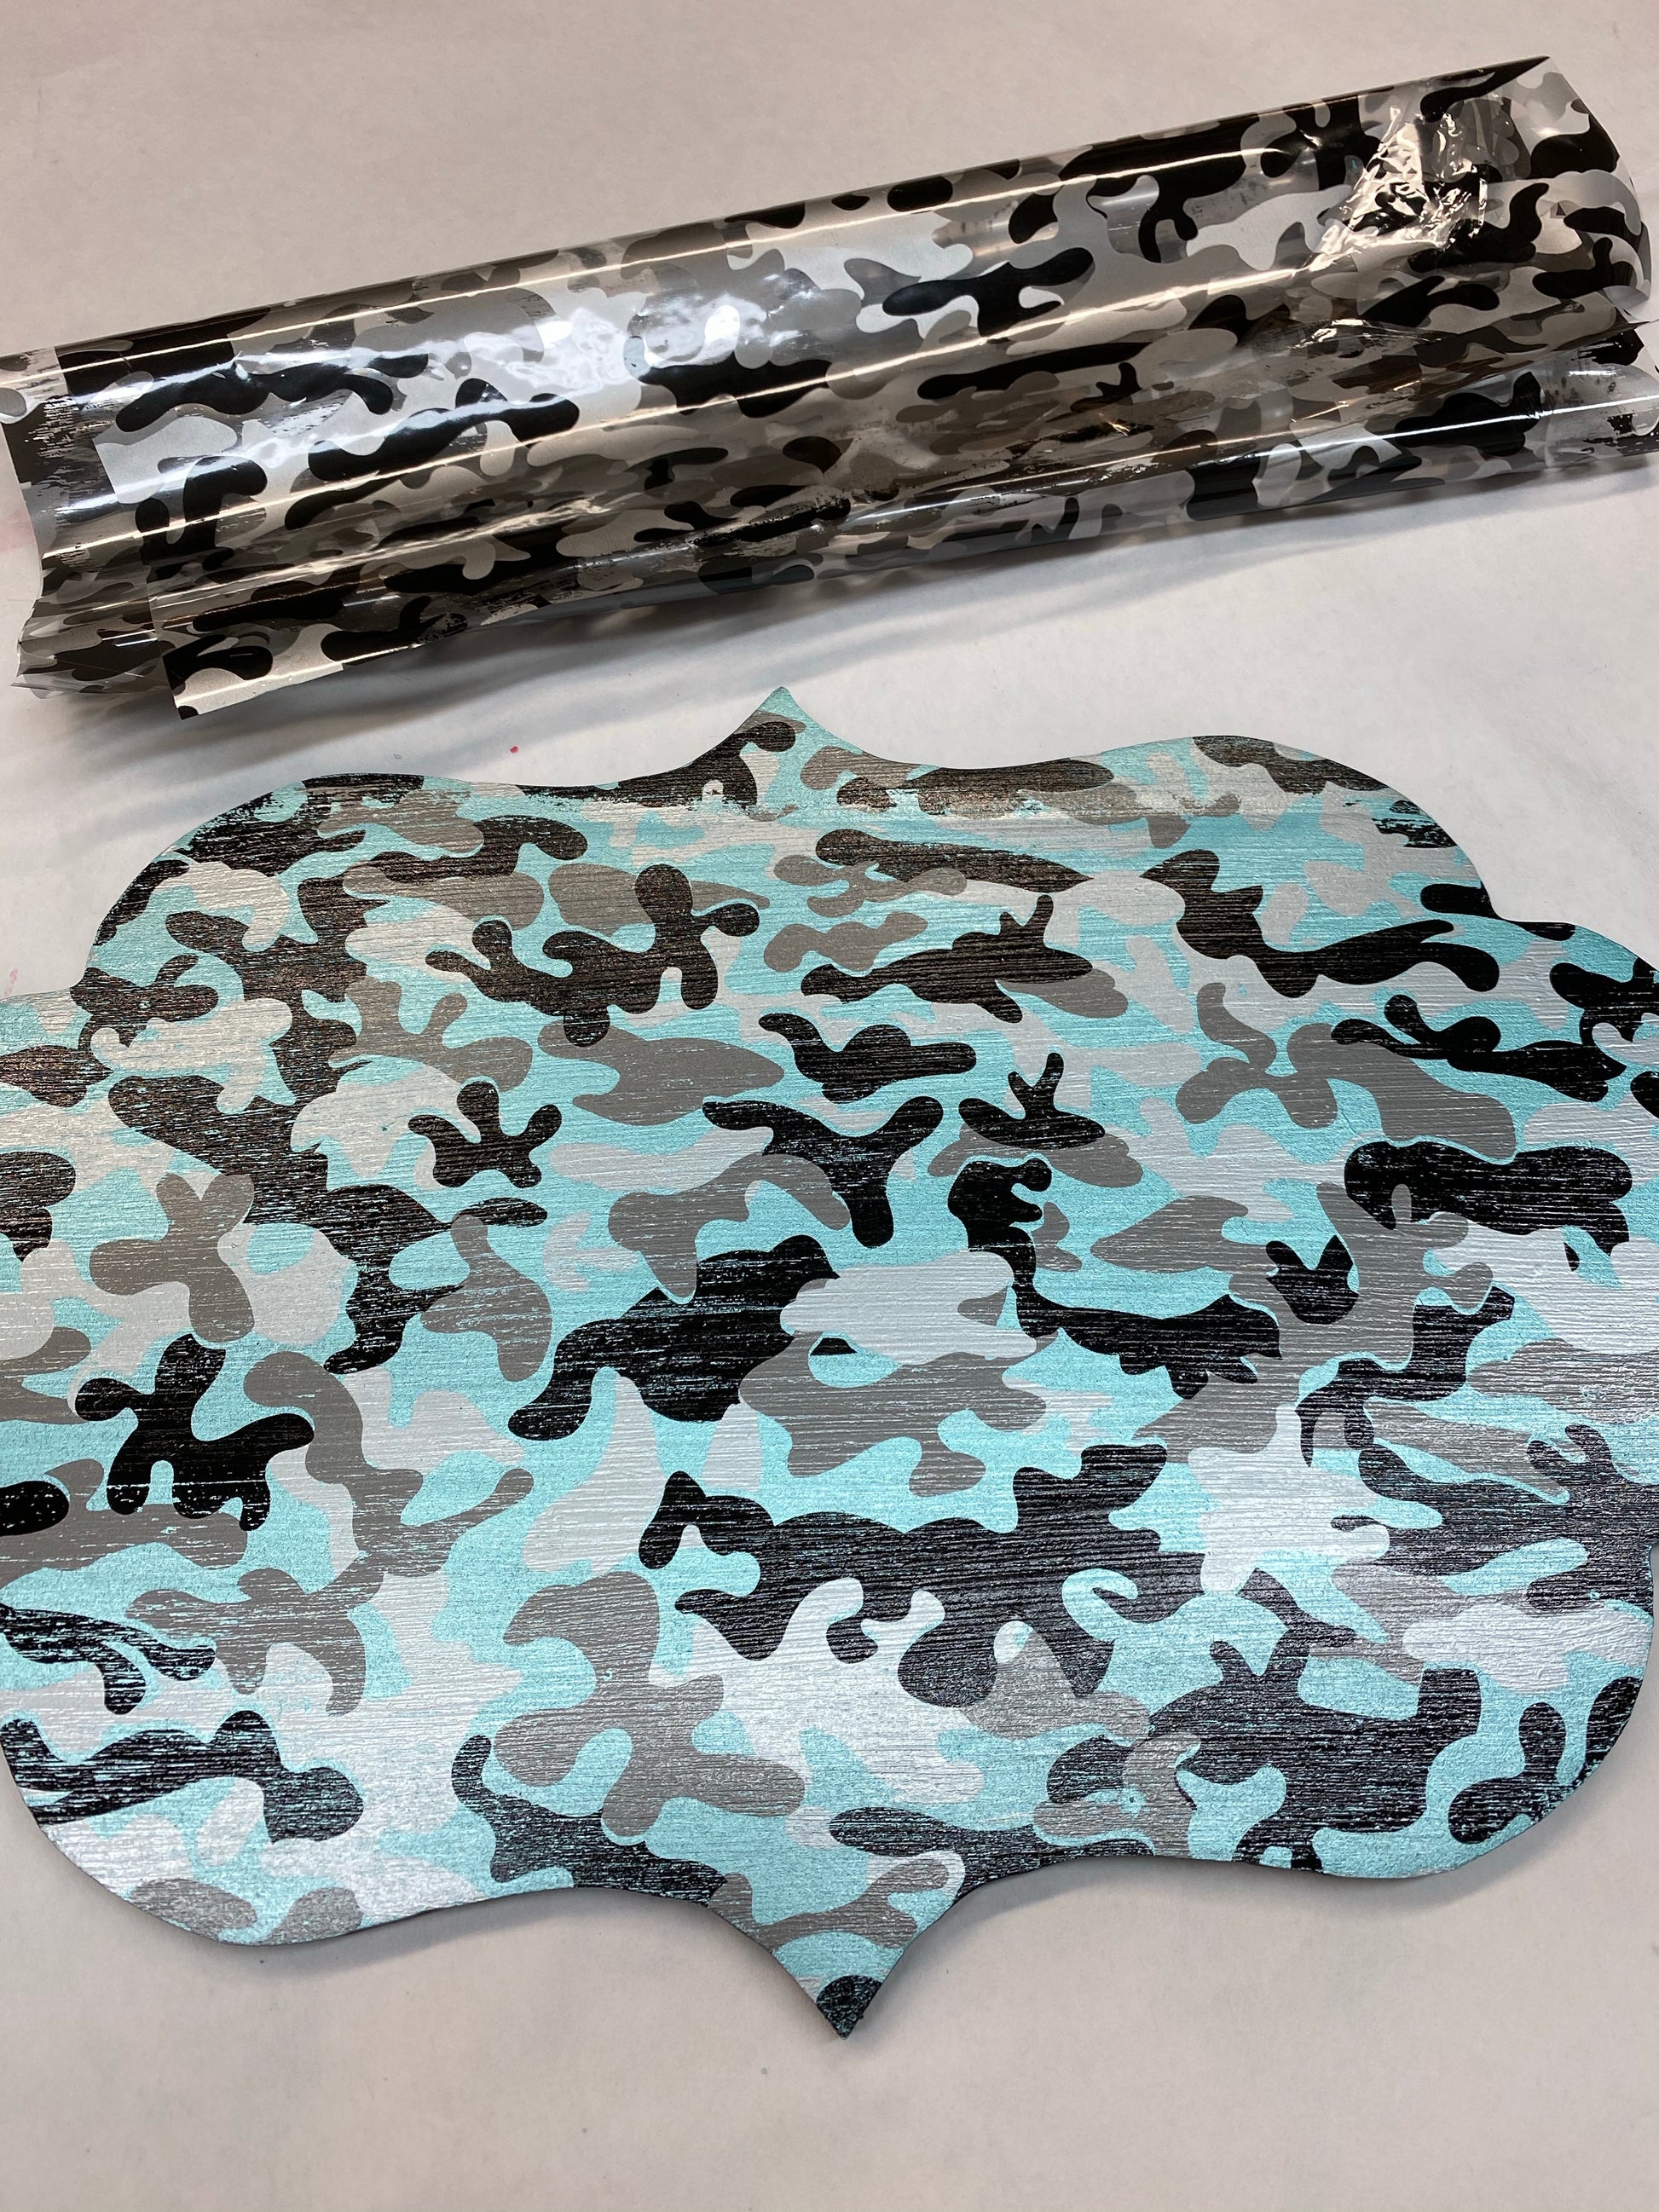 This foil is a Camo pattern with black silver and clear areas - as shown in this picture, you base coat color will show through the transparent/clear areas. 